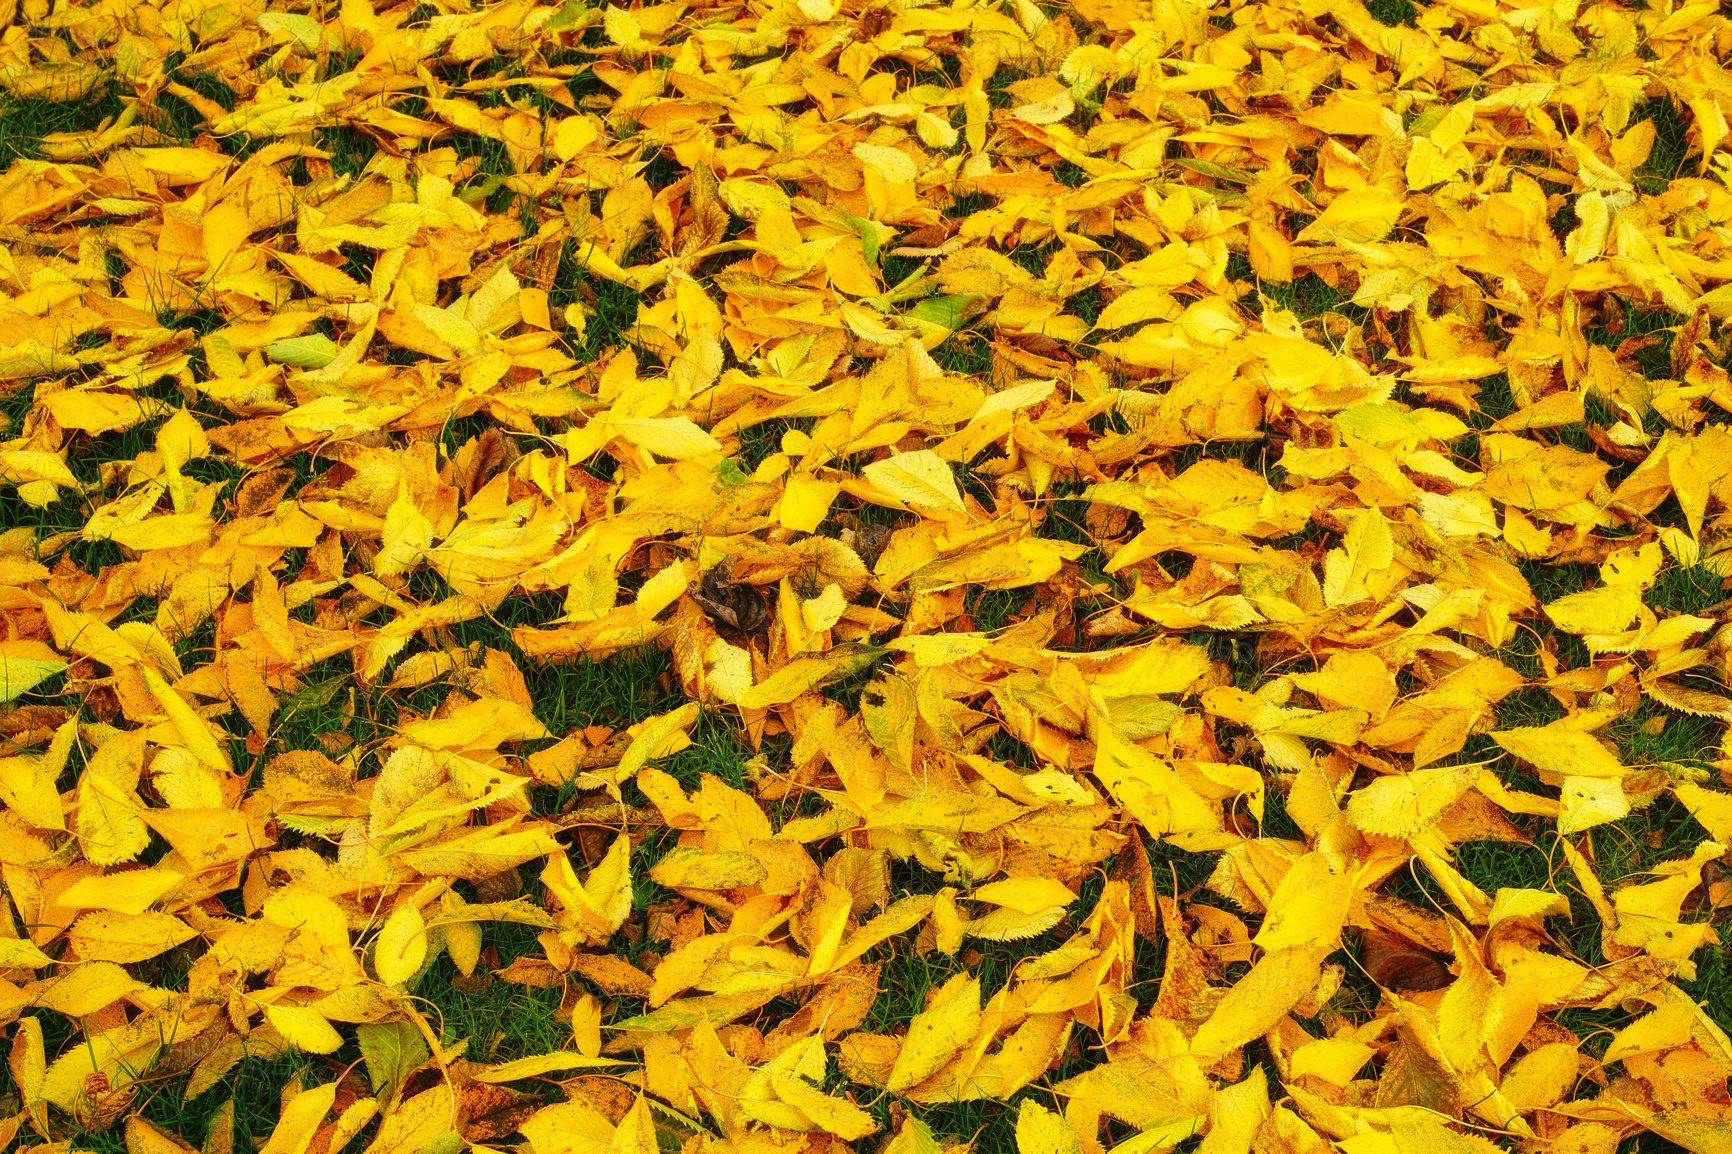 Buy stock photo Autumn, leaves and natural season with change, outdoor woods or foliage on green grass in nature. Closeup of fallen orange, brown and yellow leafs on ground with growth of an eco friendly environment